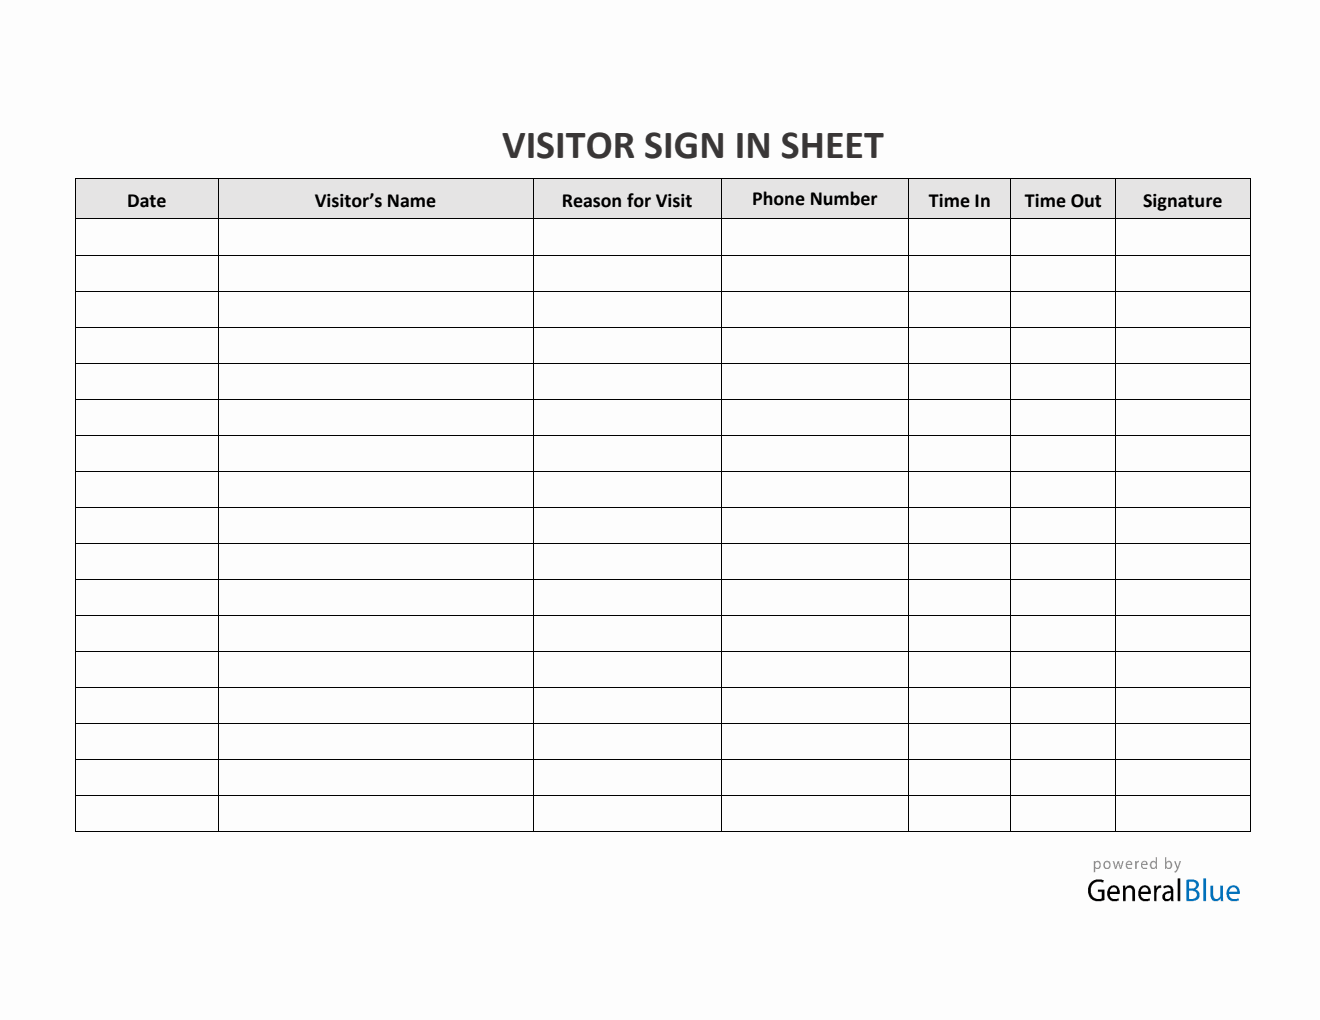 Visitor Sign In Sheet in Word